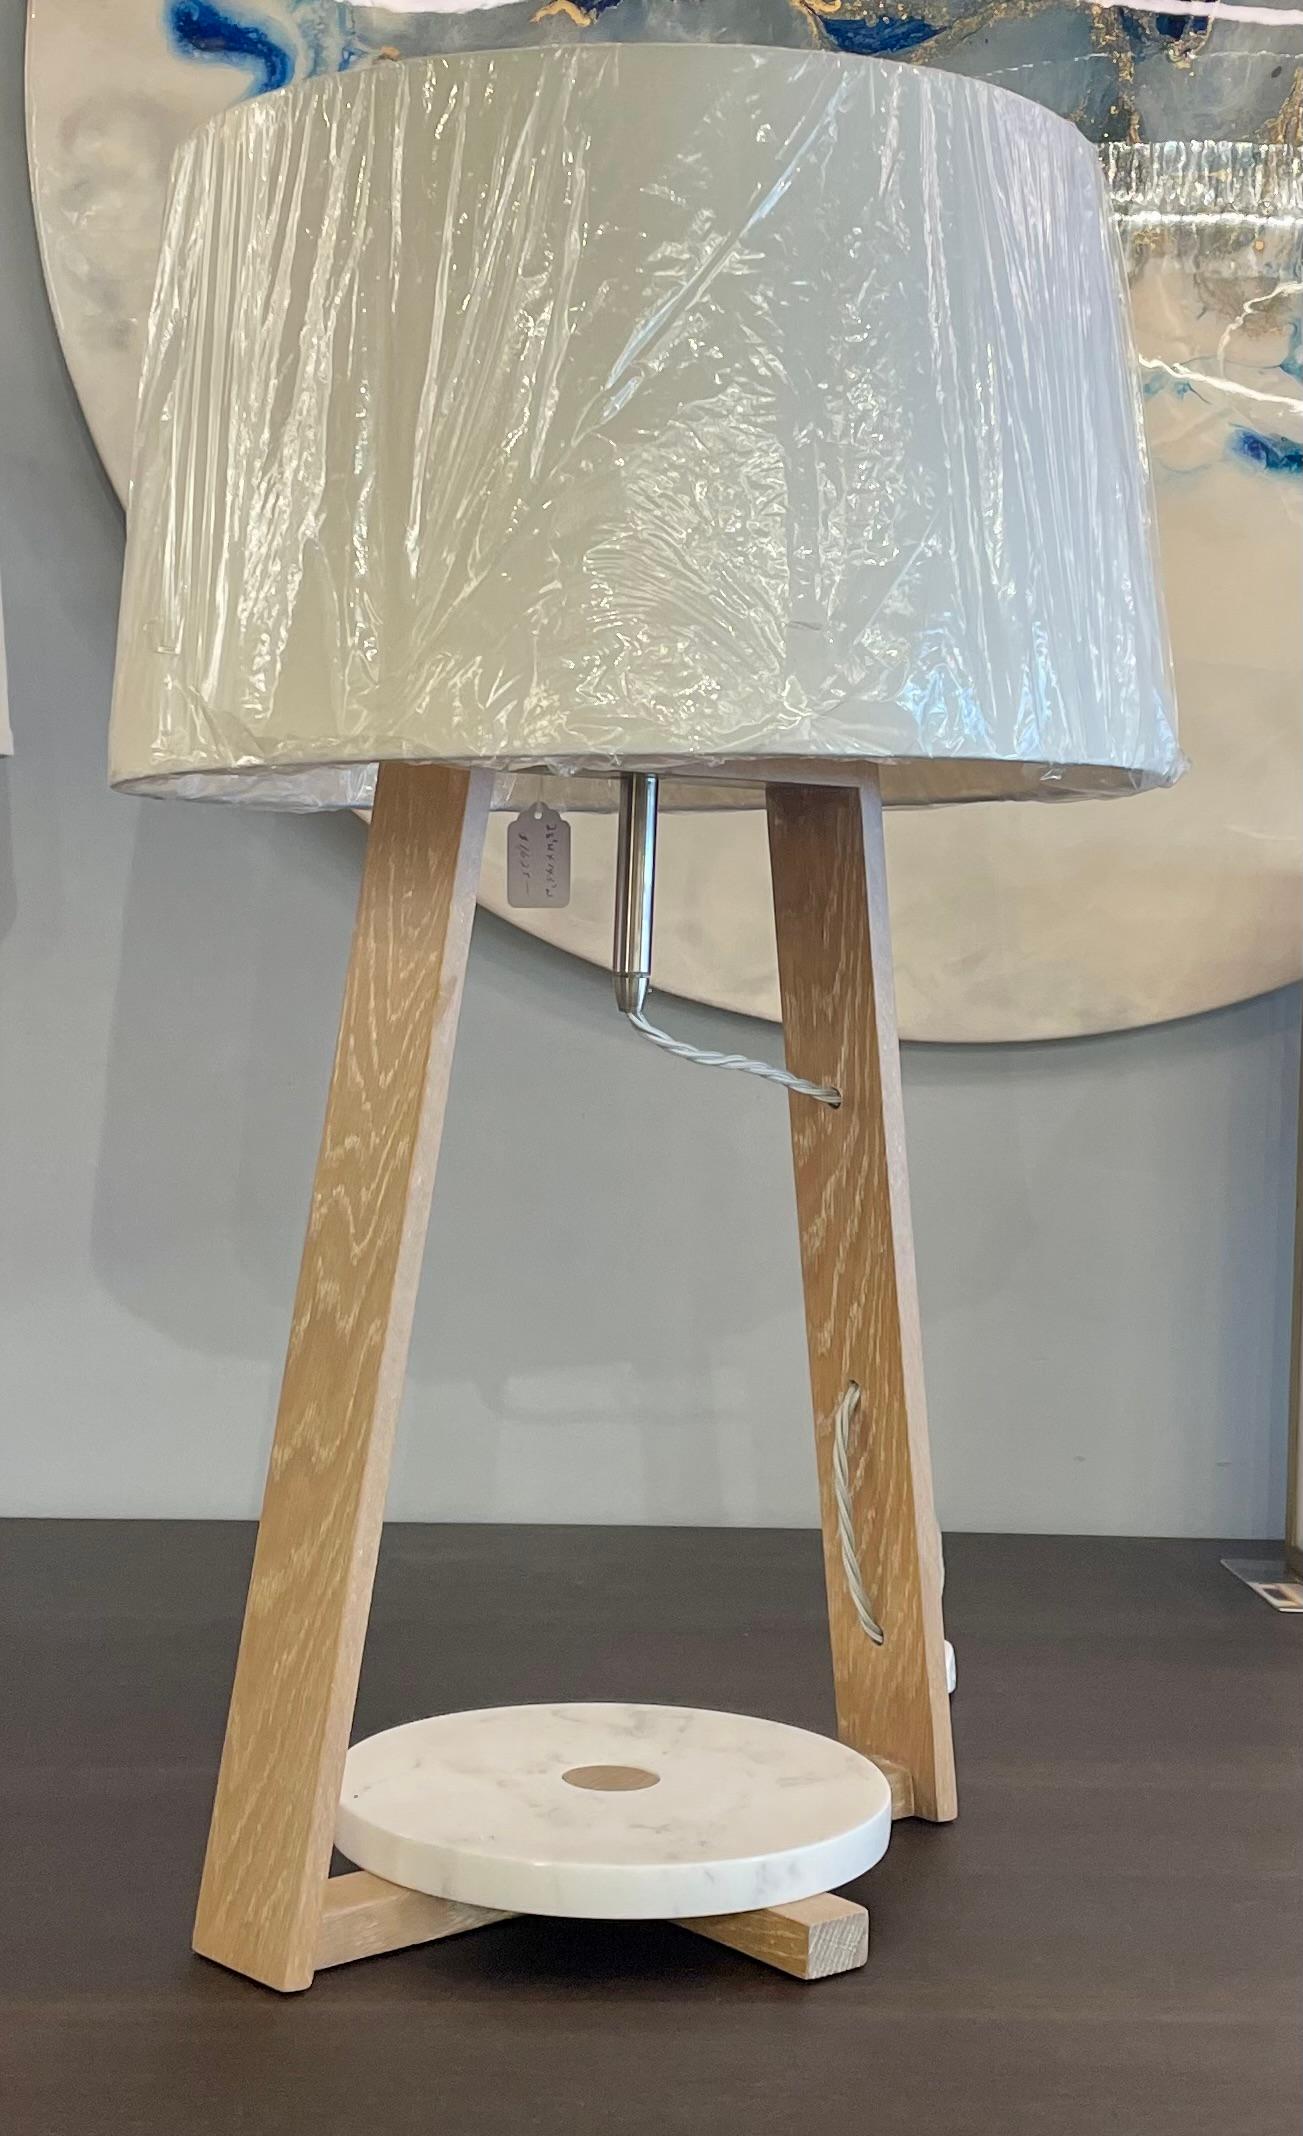 Contemporary White Oak Table Lamp with marble base and round shade.
   